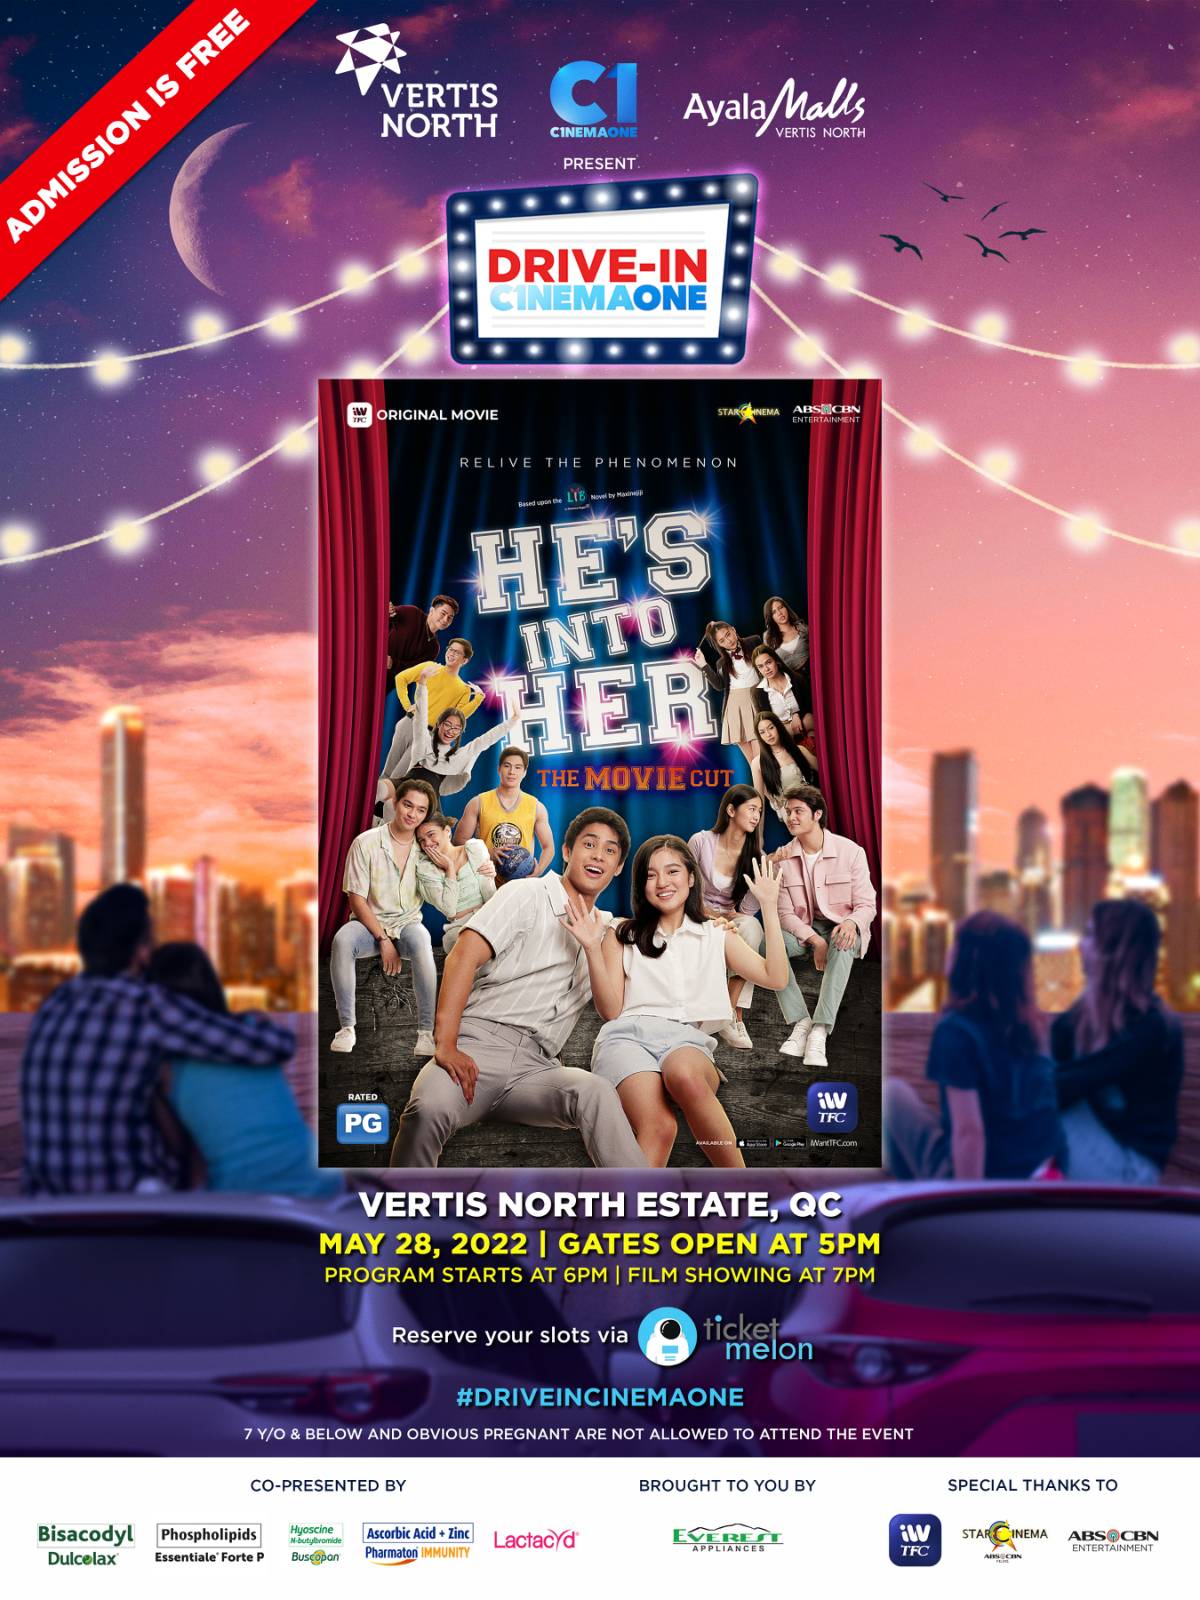 Hes Into Her Season 1 Movie Cut to screen at Drive In Cinema One